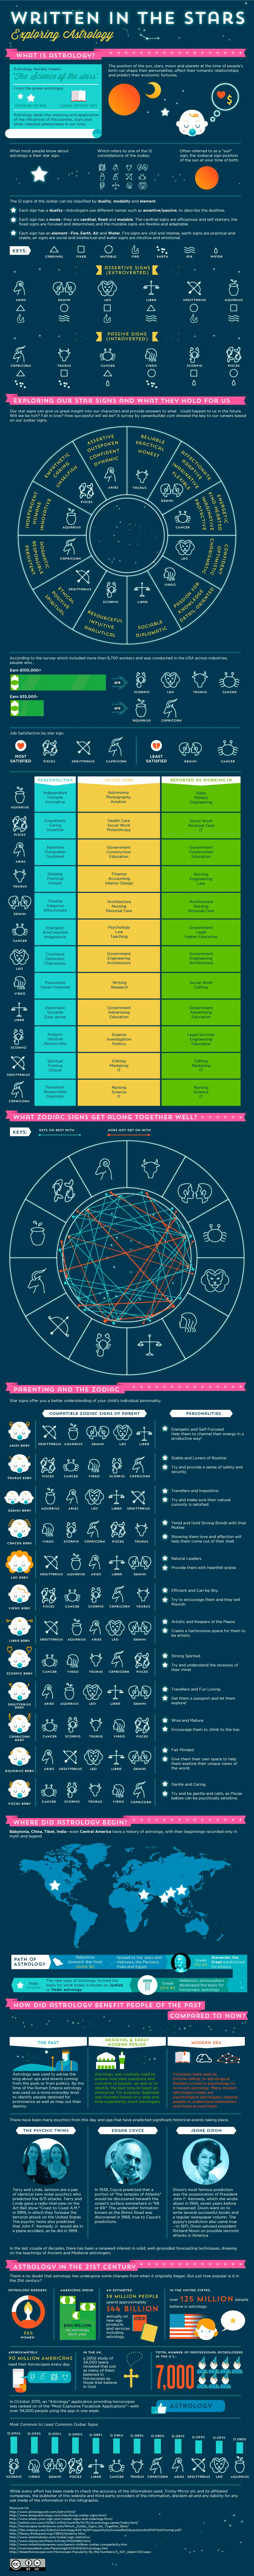 Astrology 101-Infographic